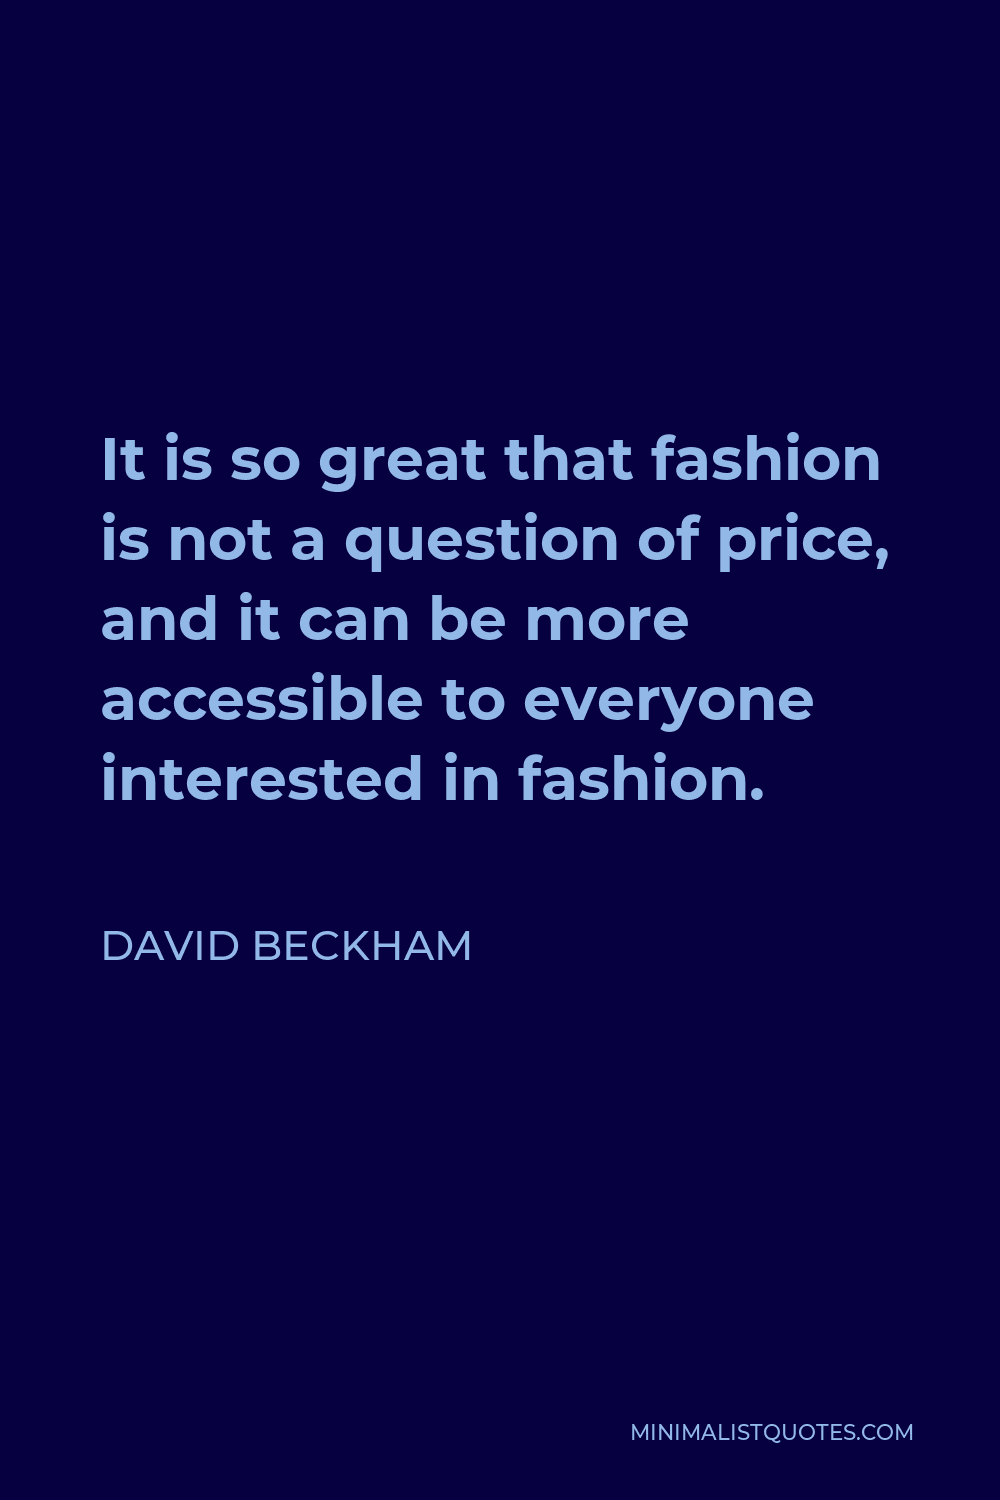 David Beckham Quote - It is so great that fashion is not a question of price, and it can be more accessible to everyone interested in fashion.